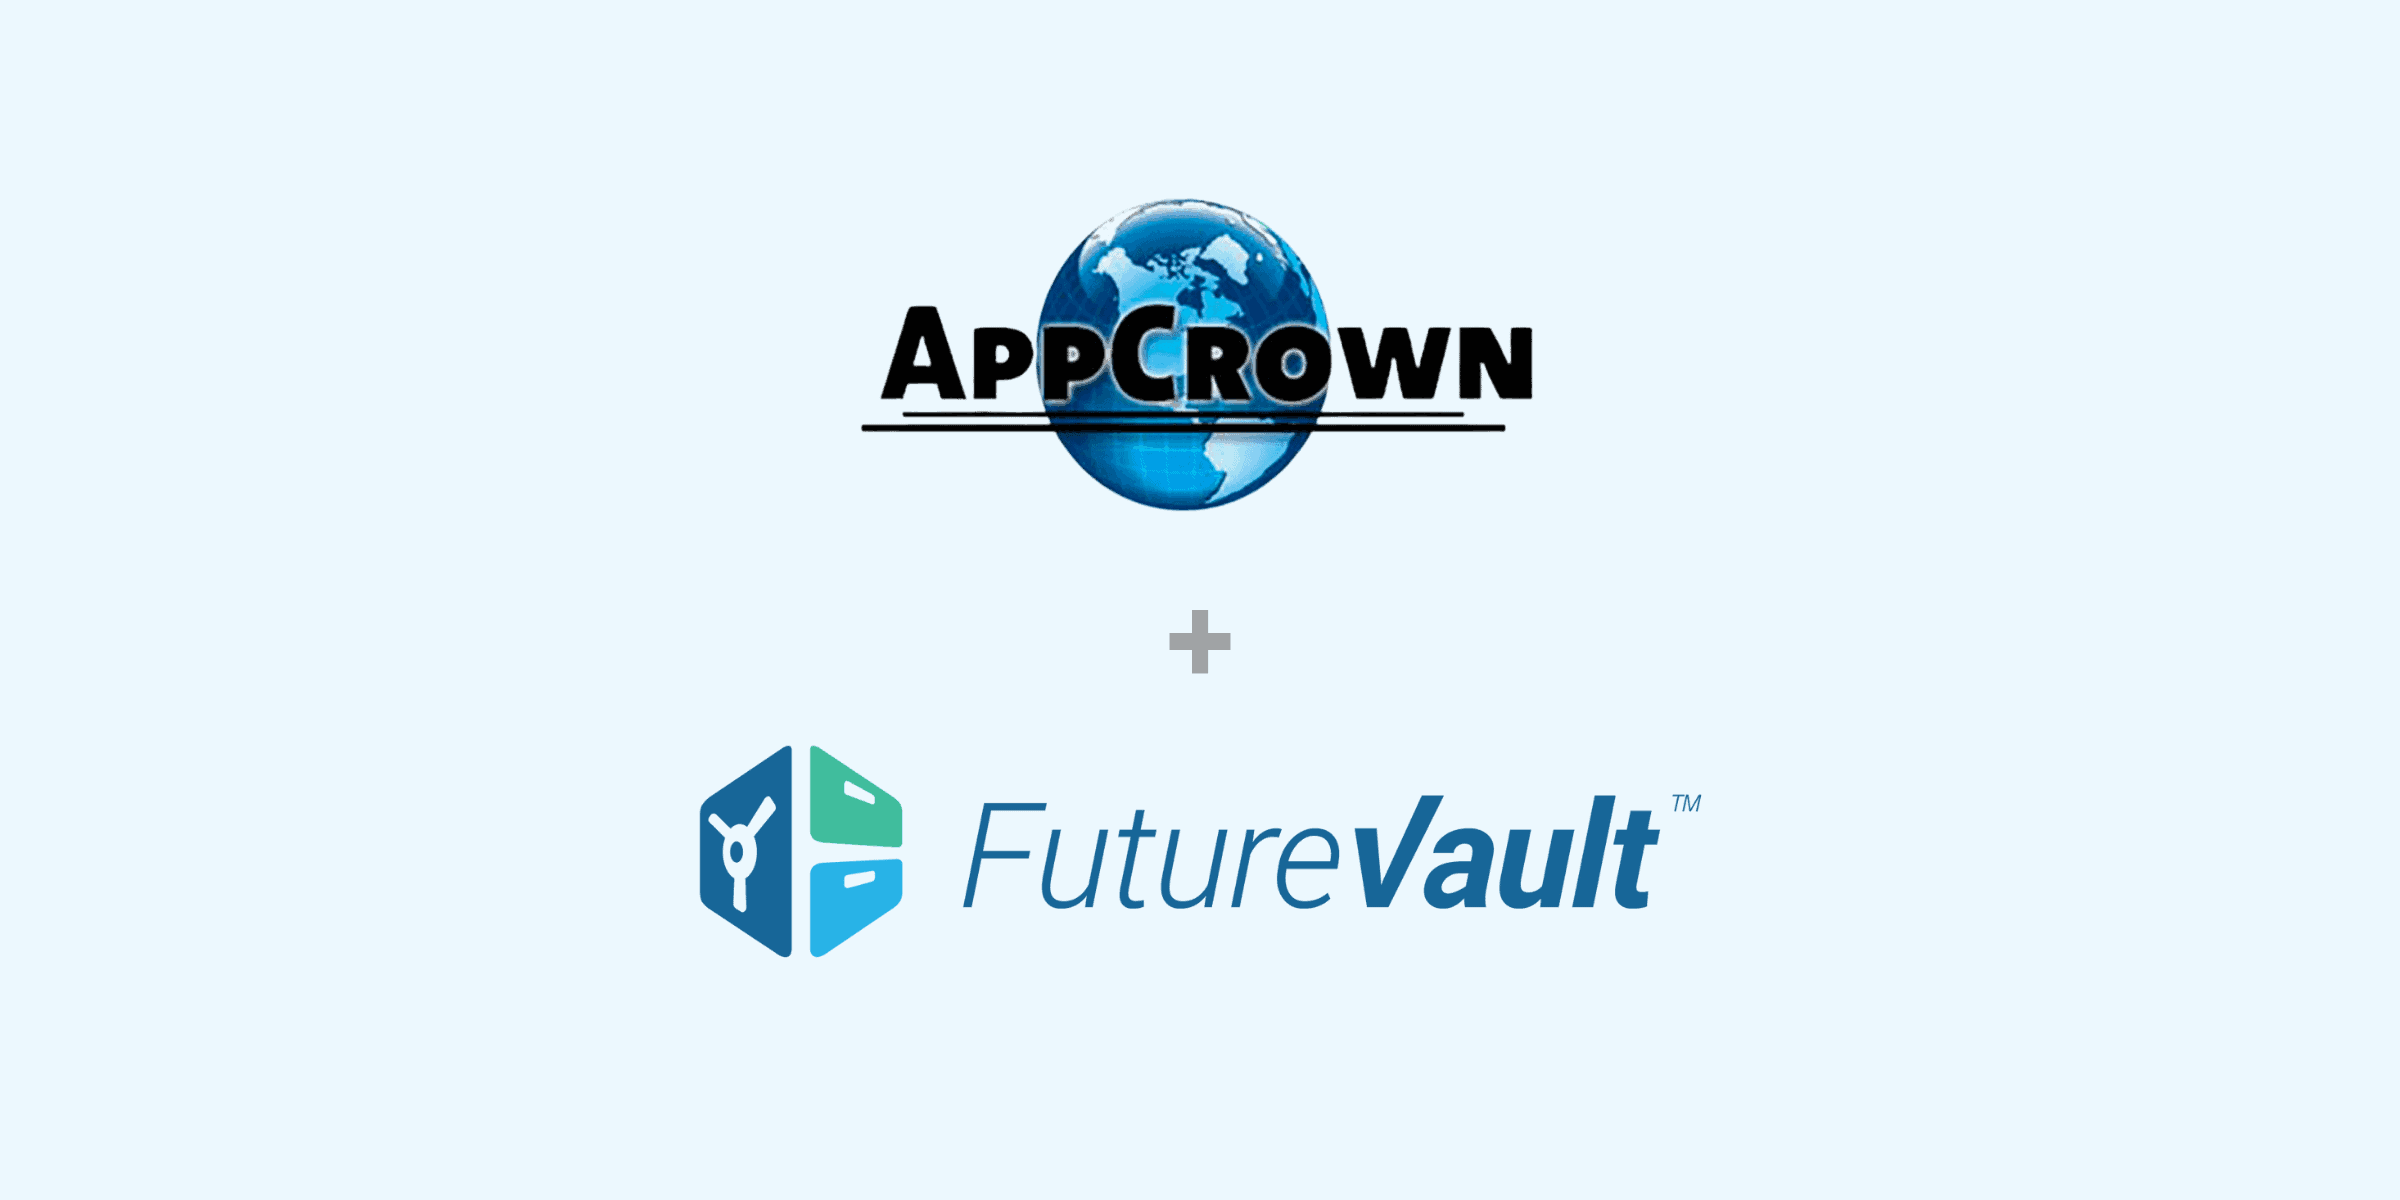 Market Leaders AppCrown and FutureVault Announce Strategic Partnership